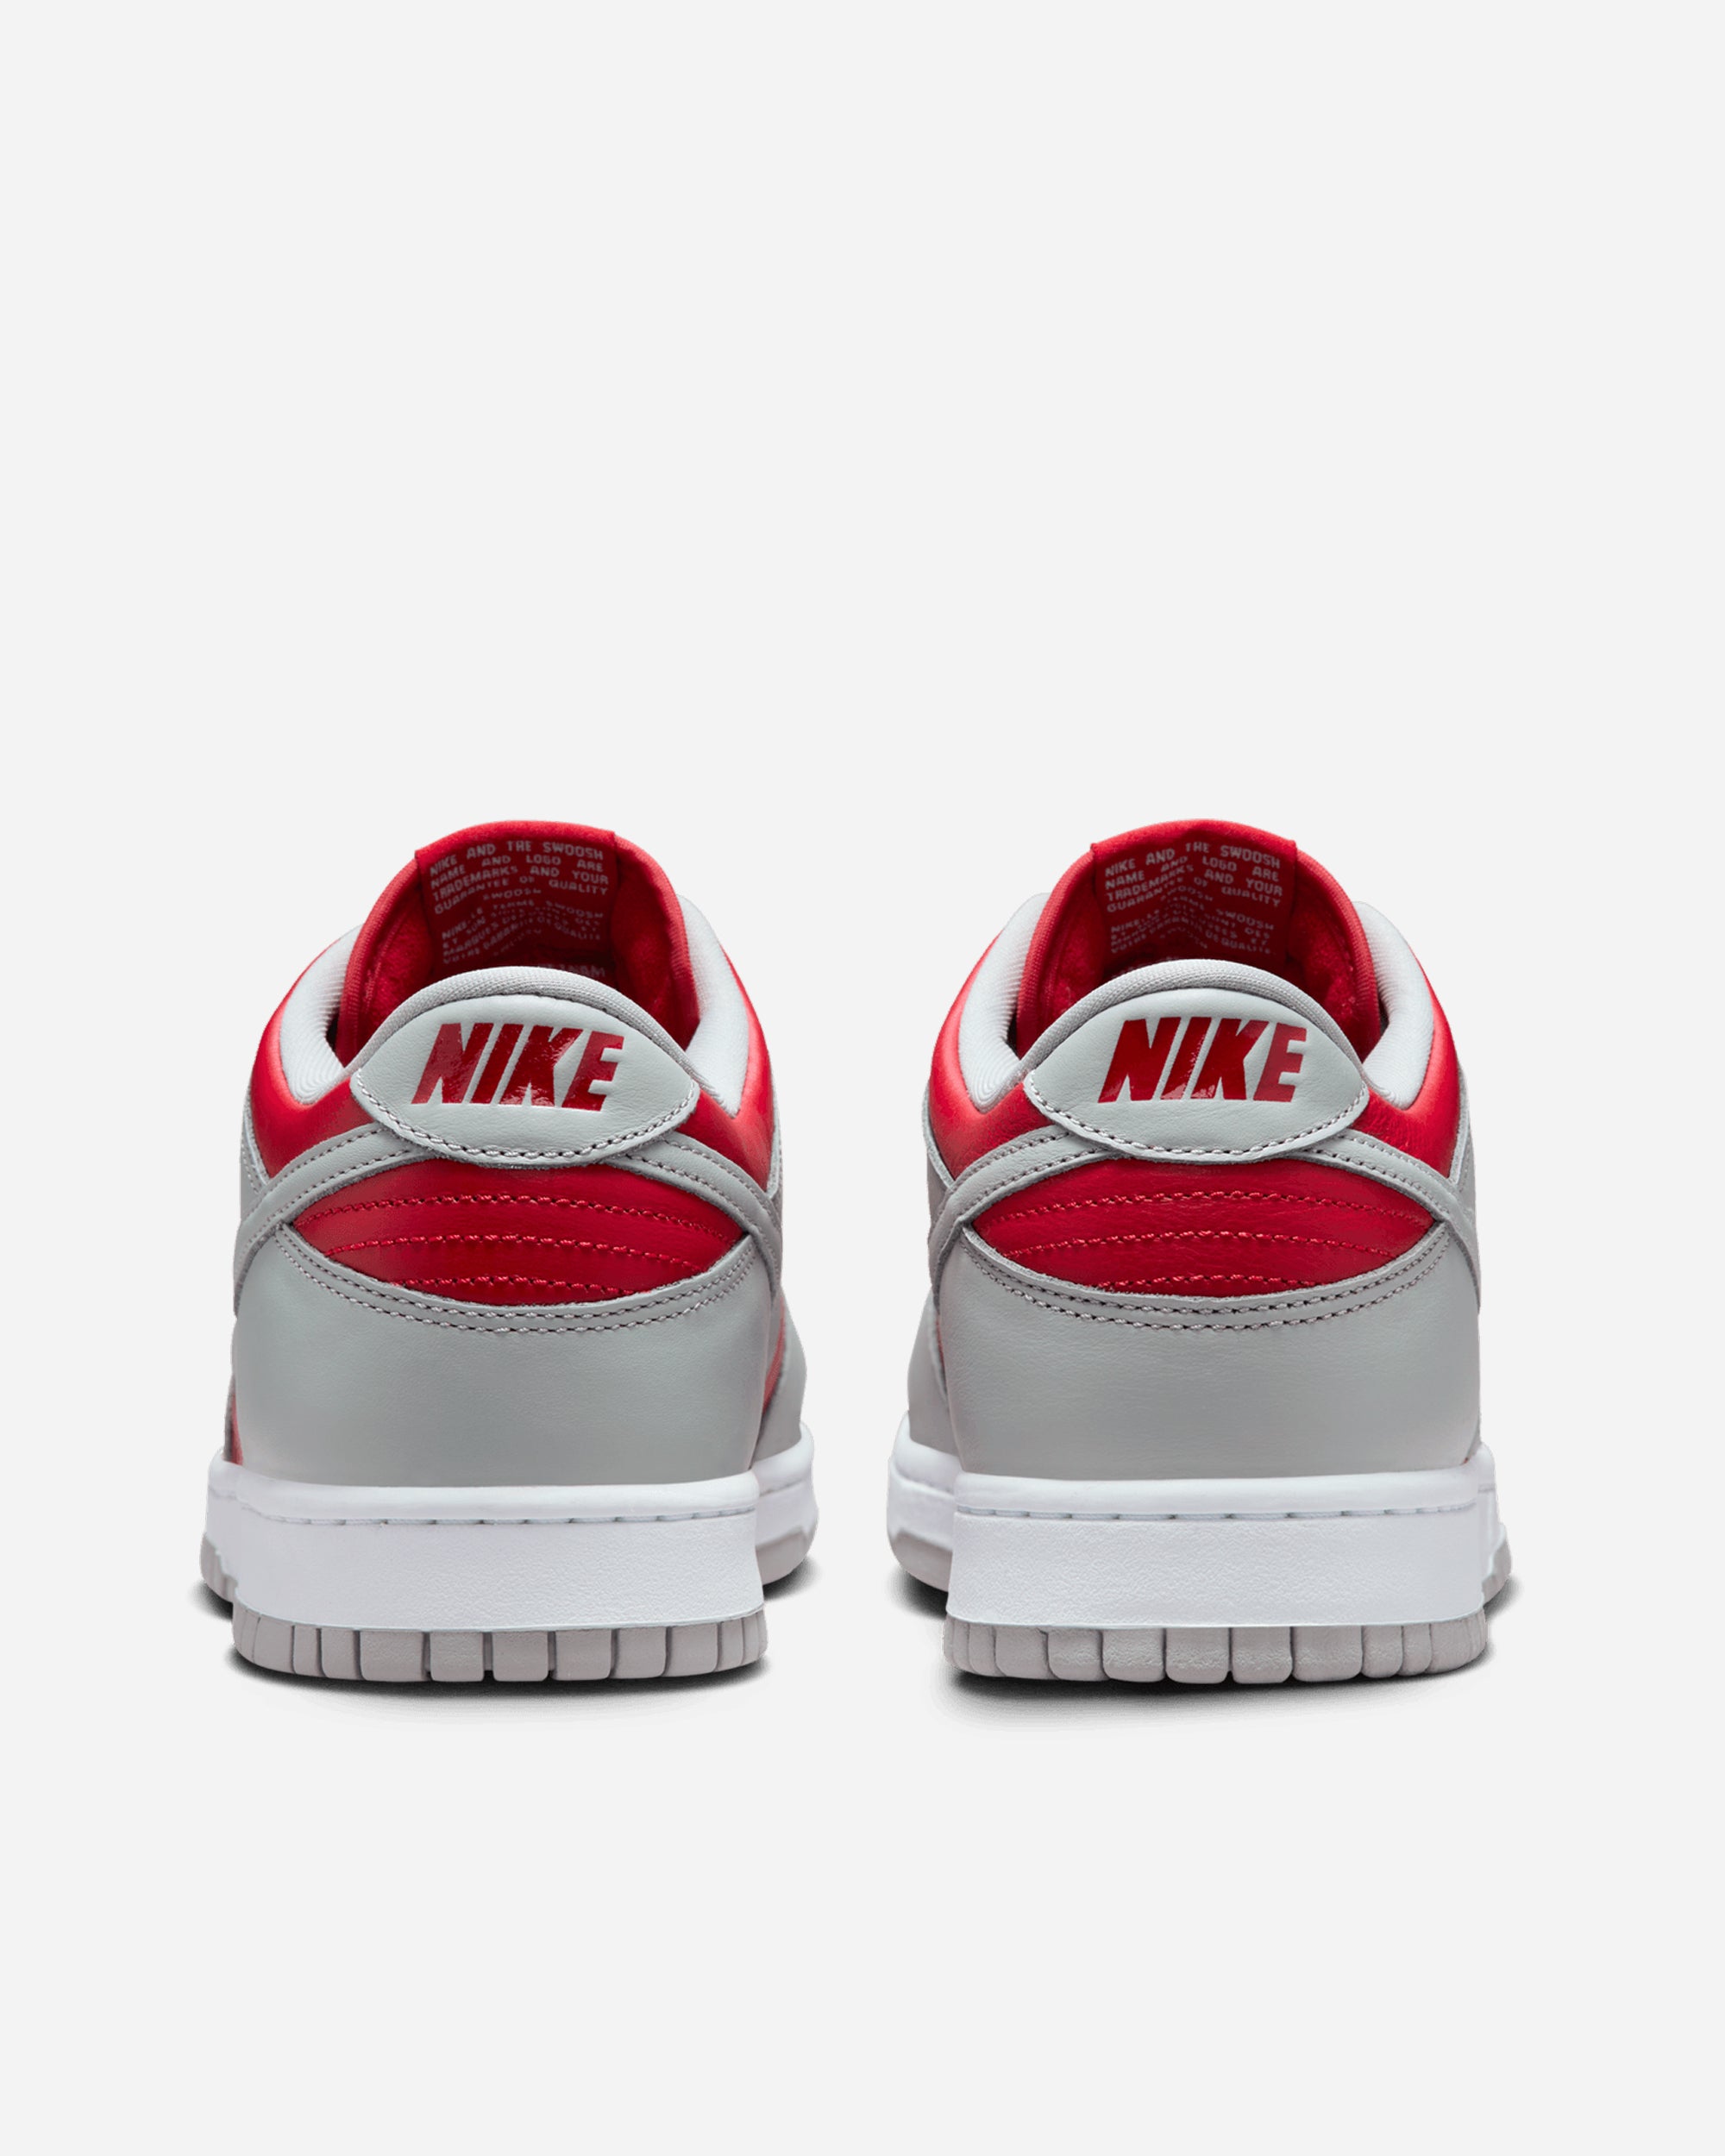 Nike Dunk Low 'Ultraman' VARSITY RED/SILVER-WHITE FQ6965-600